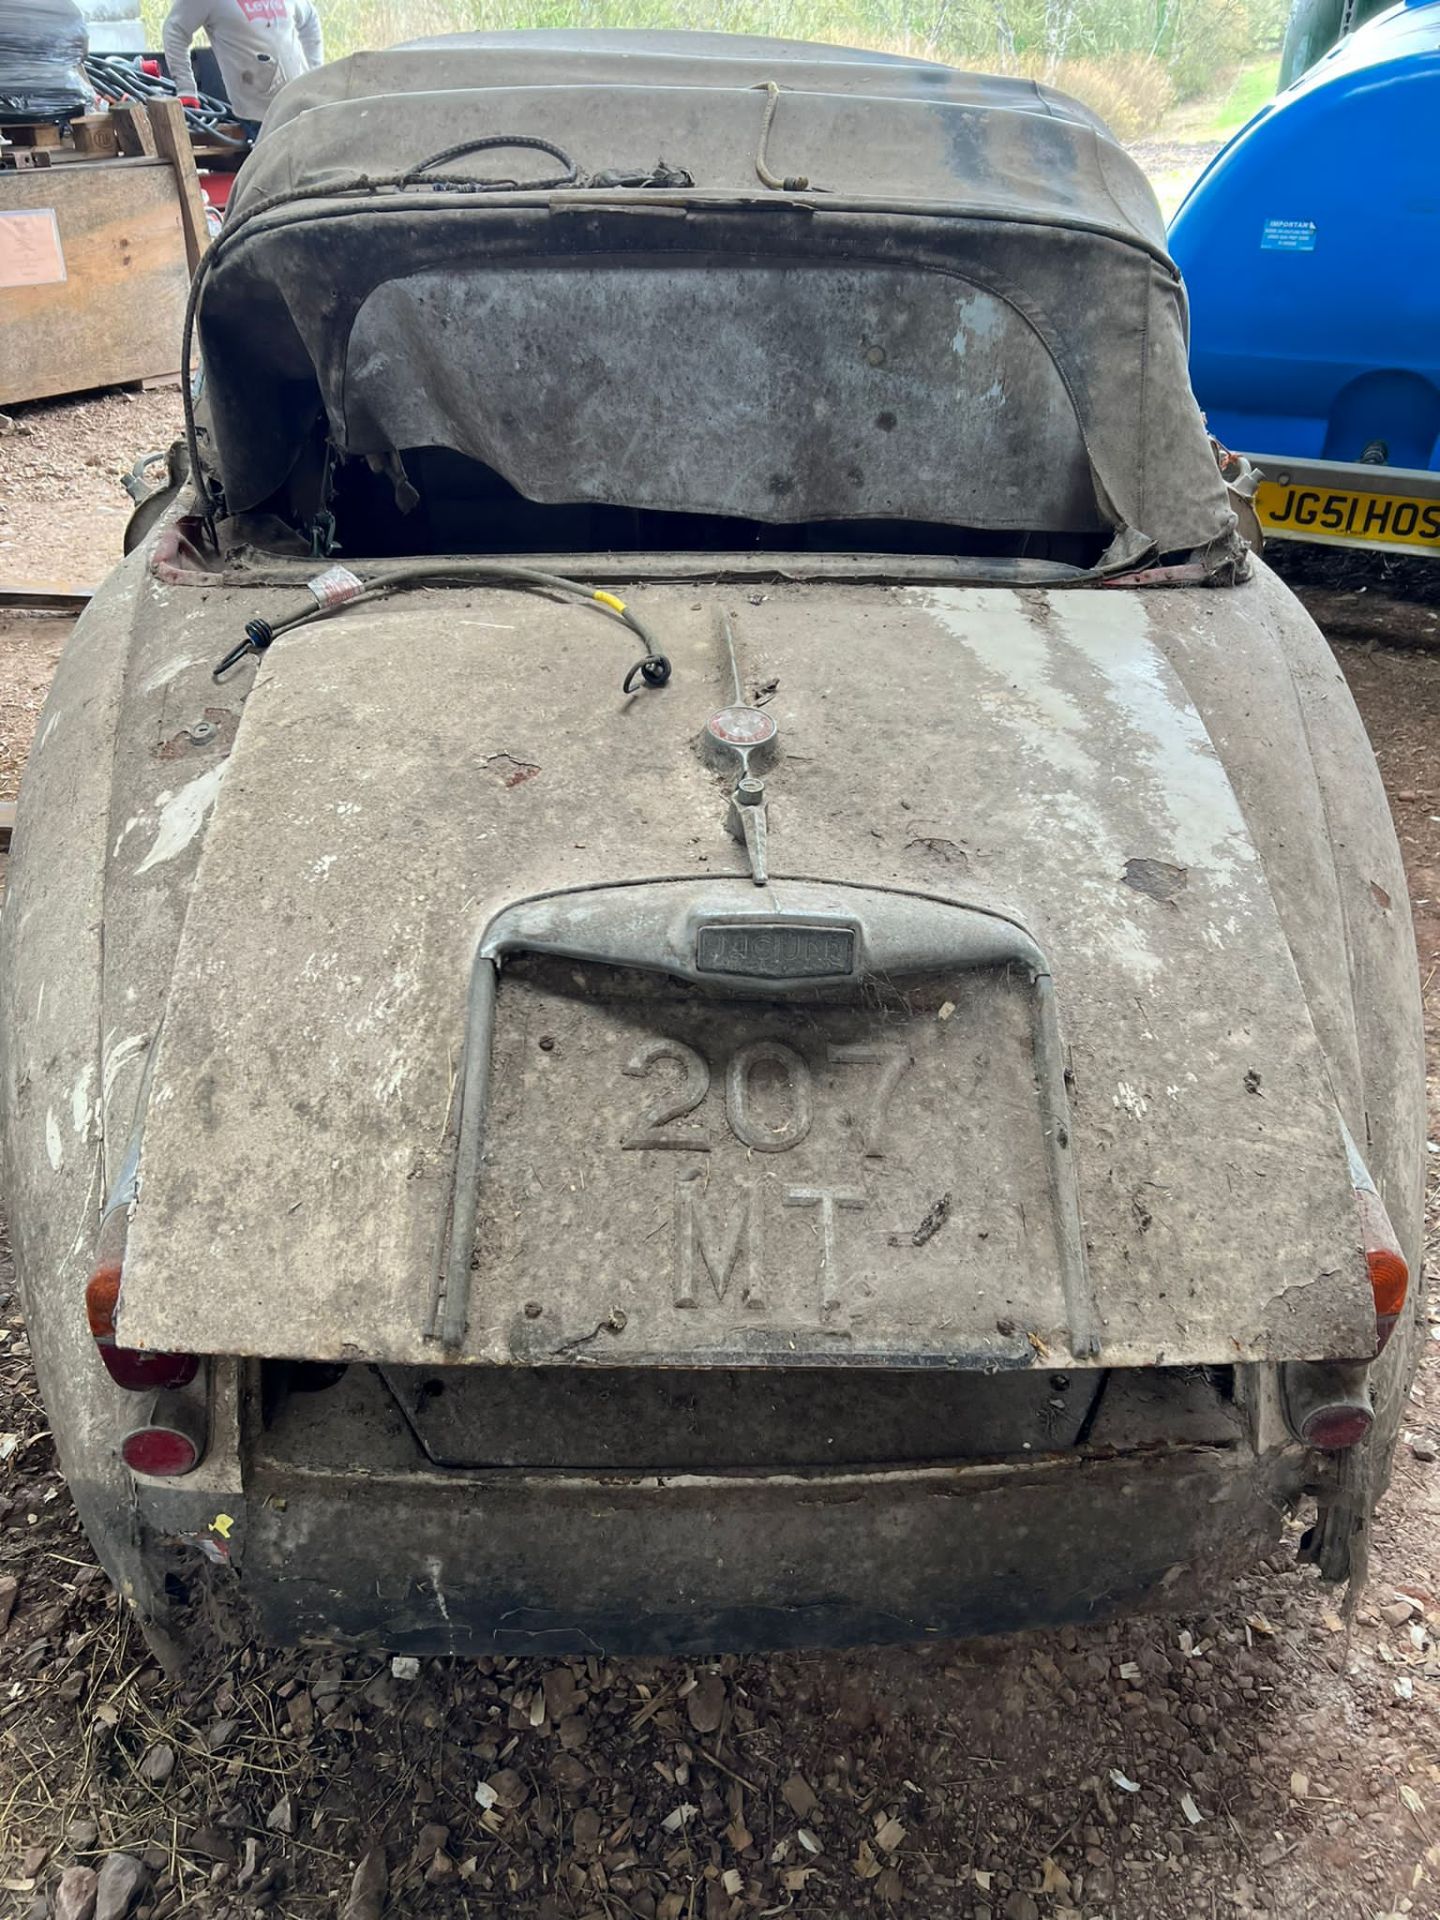 Jaguar XK150 3.4 Drop Head Coupe 1958 Barn Find. Matching numbers. - Image 24 of 27